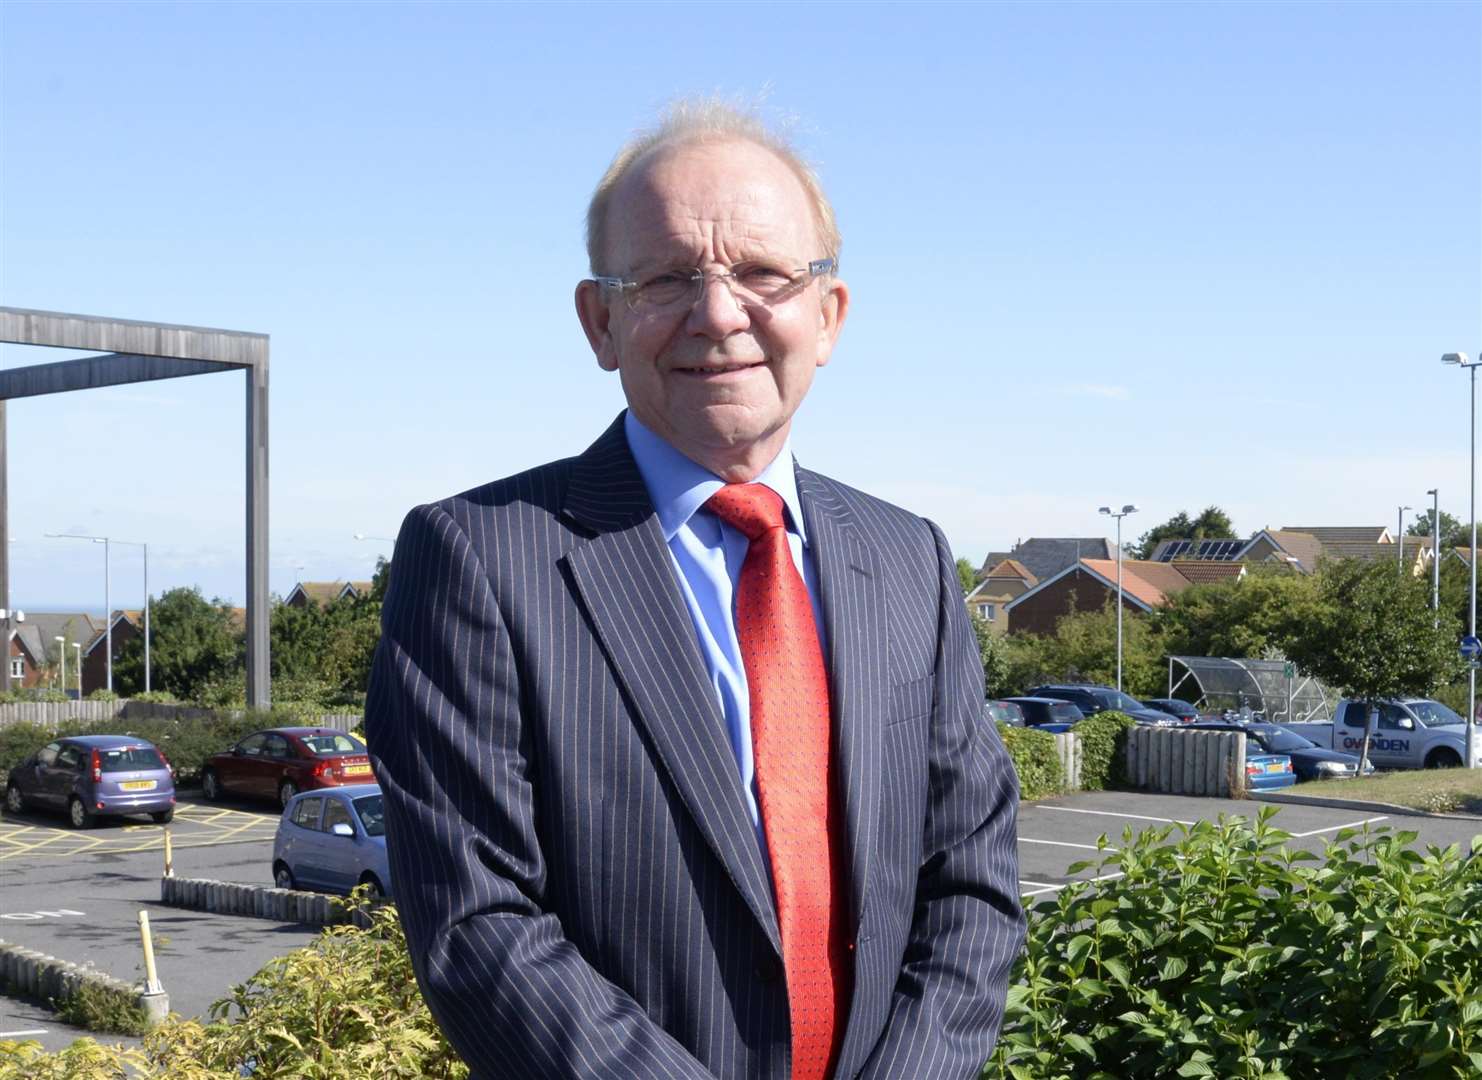 Dr John Ribchester, a senior and executive partner of Whitstable Medical Practice